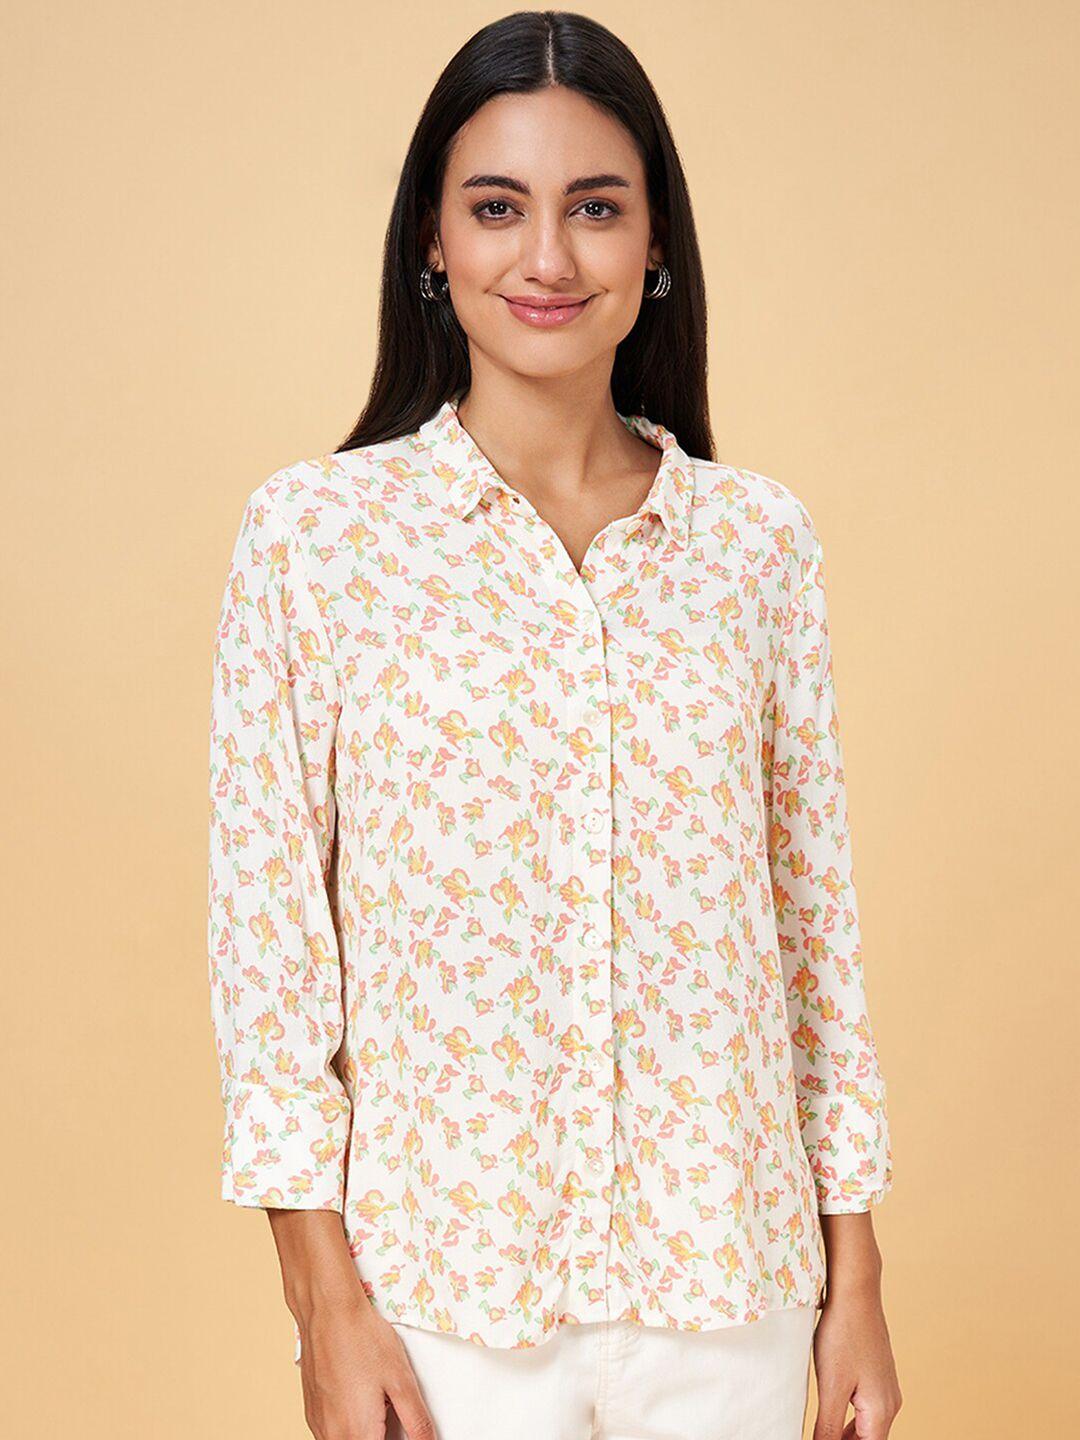 honey by pantaloons off white floral print shirt style top